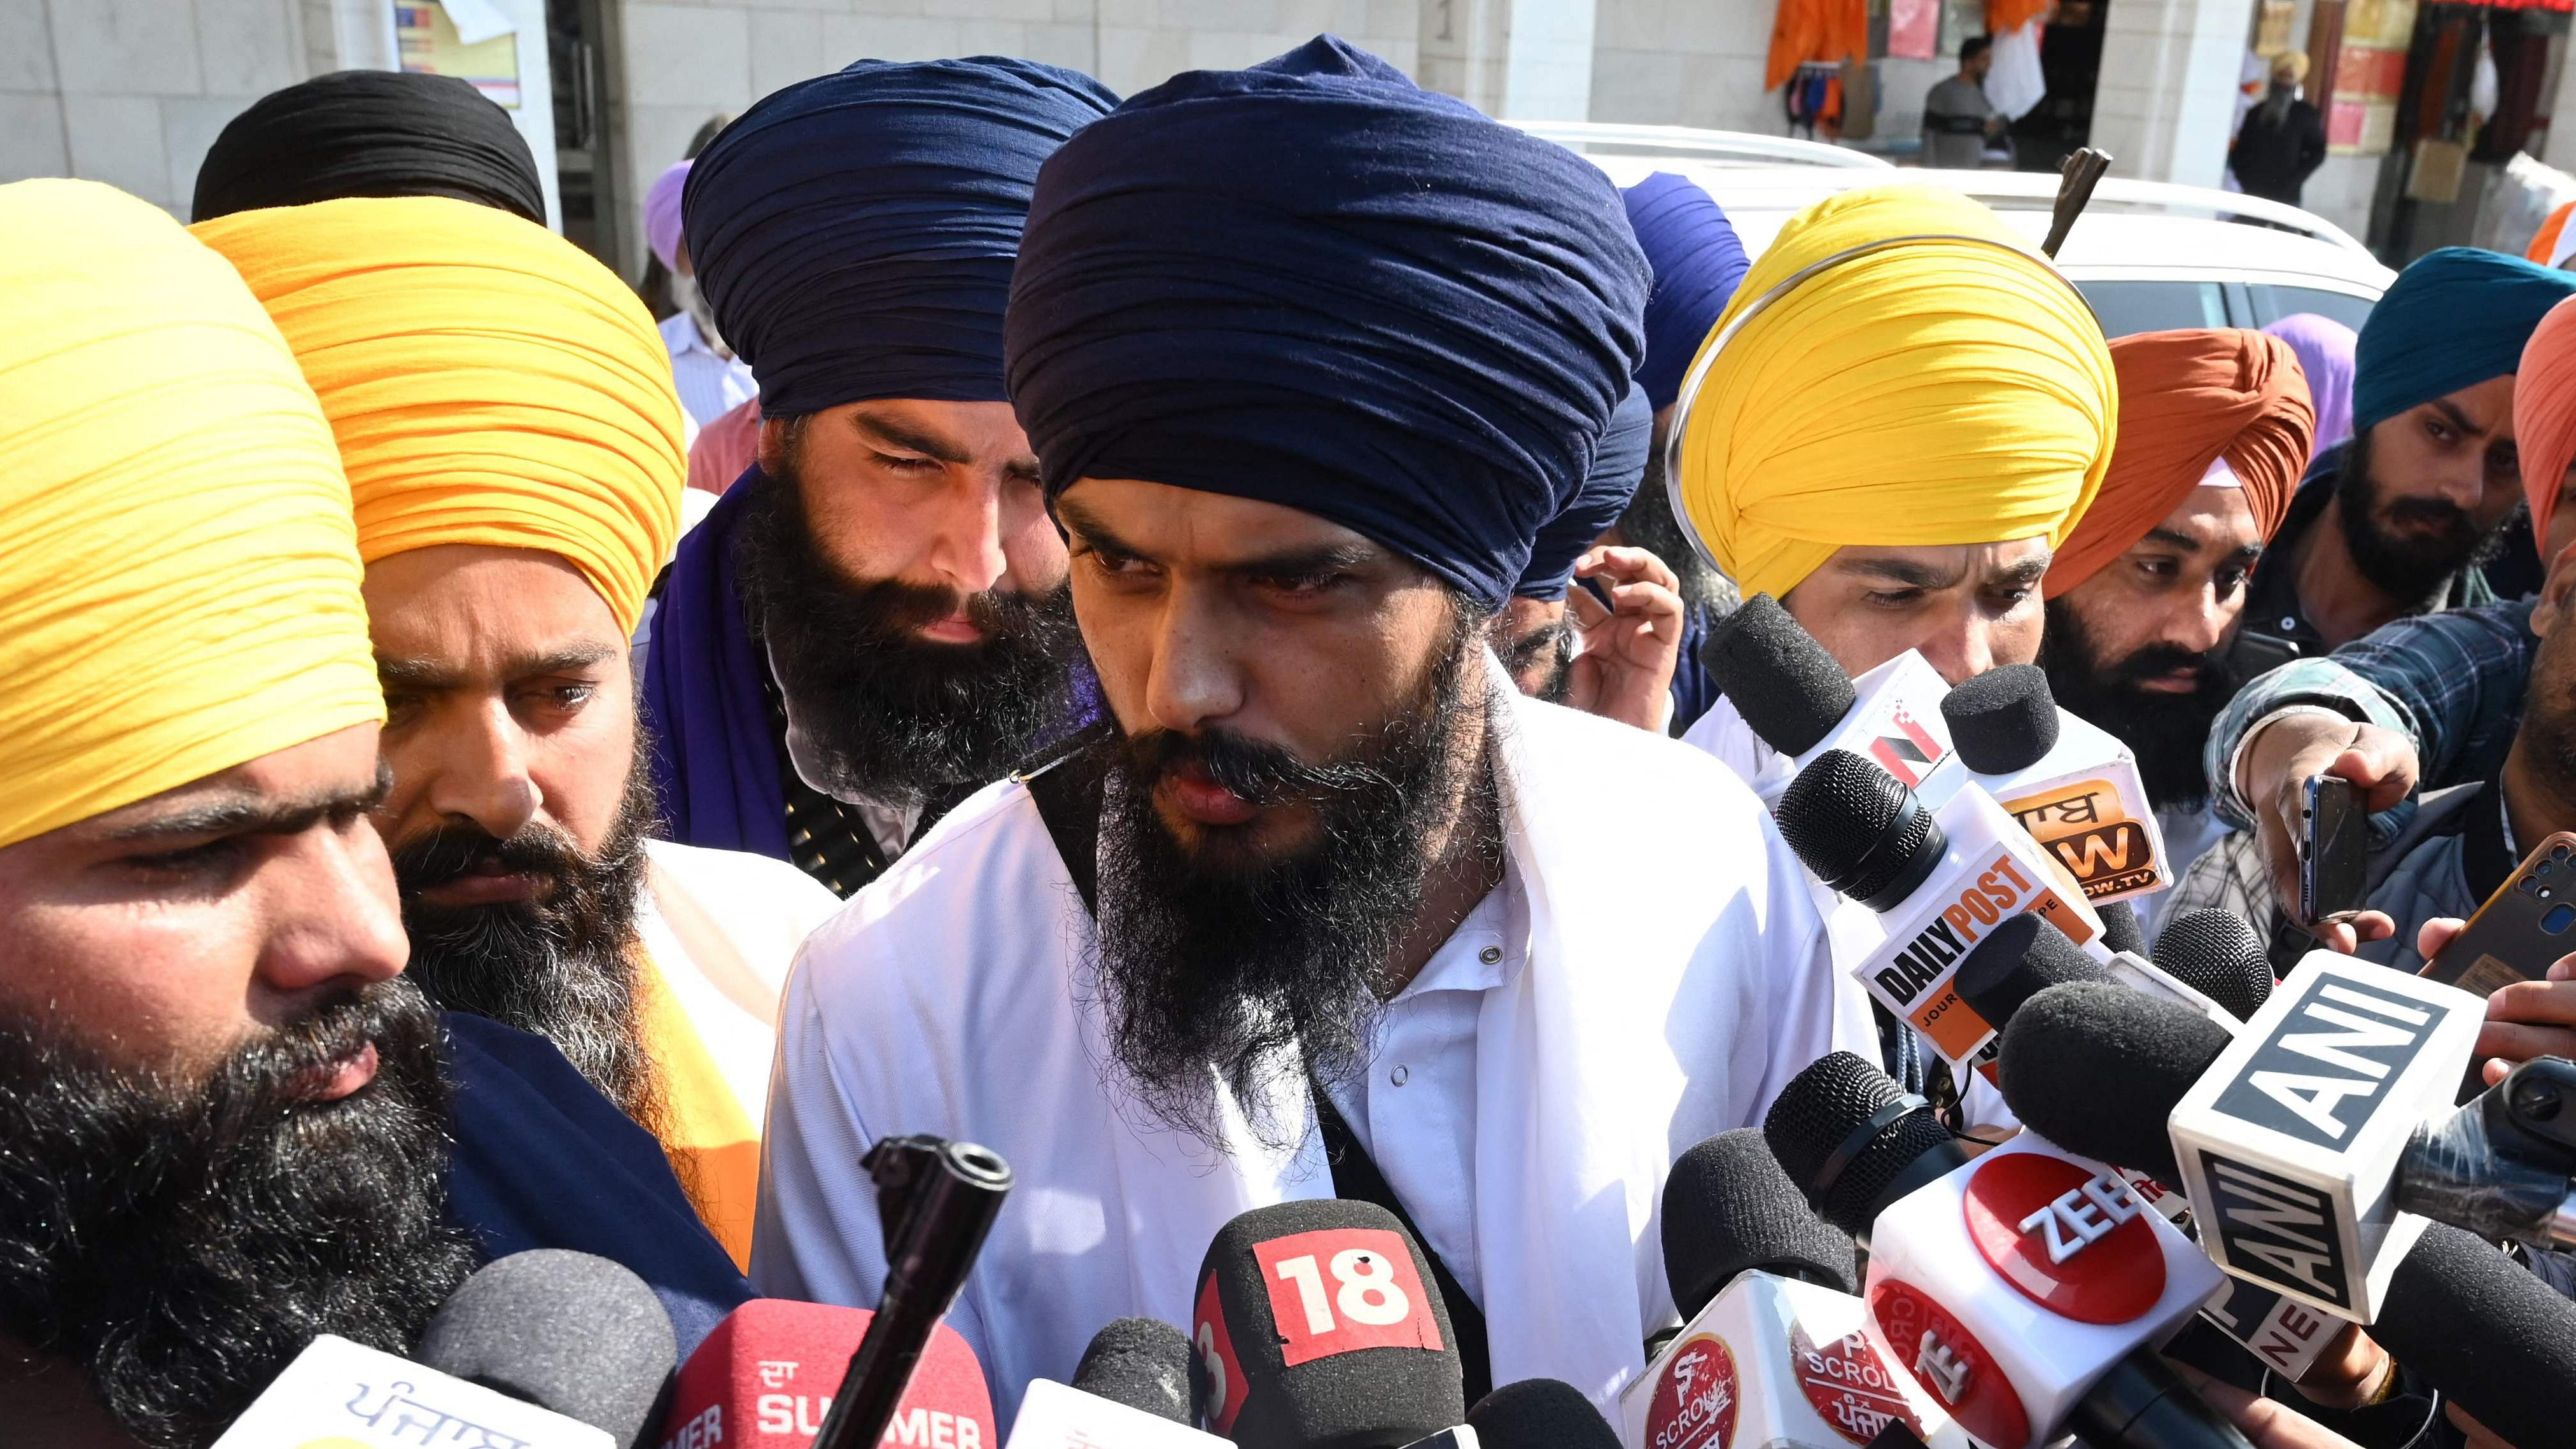 'Waris Punjab De' chief Amritpal Singh (C) speaks to the media, at the Golden Temple in Amritsar. Credit: AFP Photo